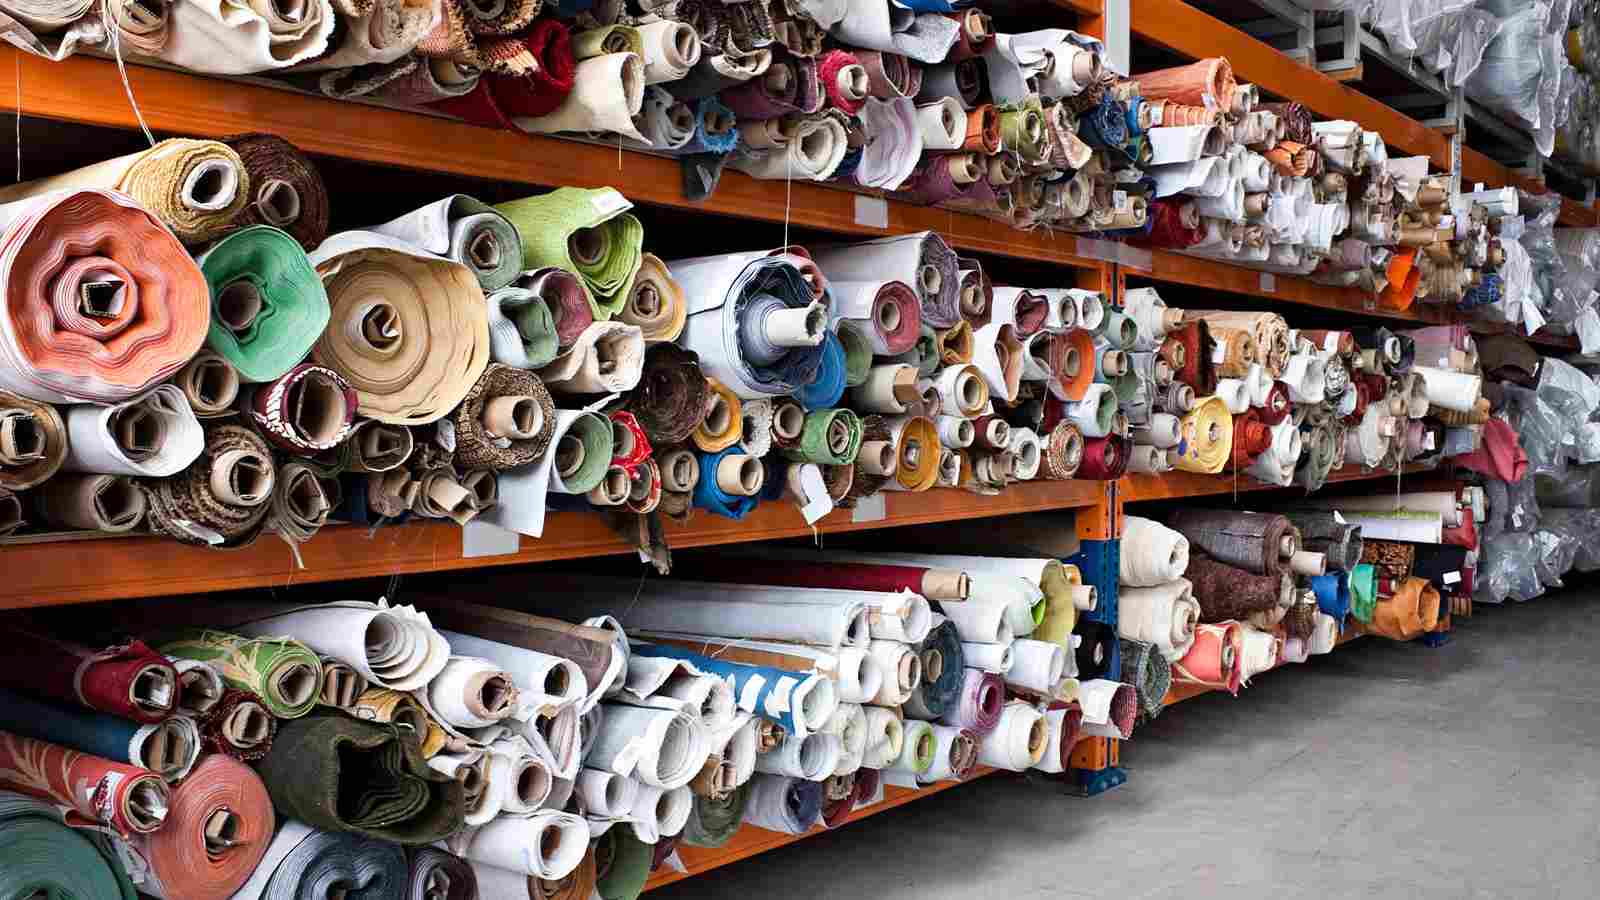 Many rolls of fabric are on shelves in a warehouse.